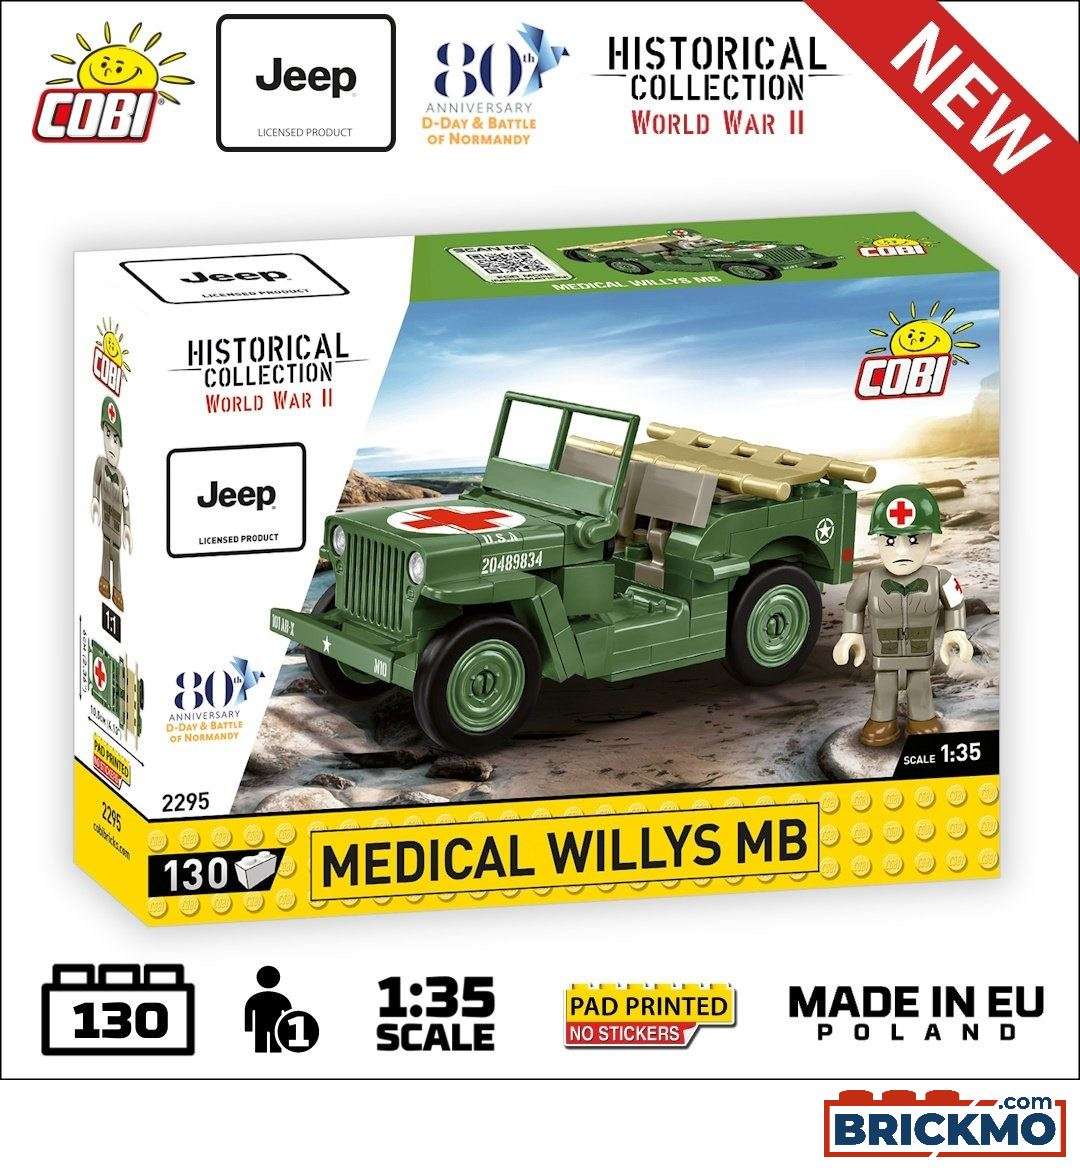 Cobi Historical Collection World War II 2295 Medical Willys MB 2295